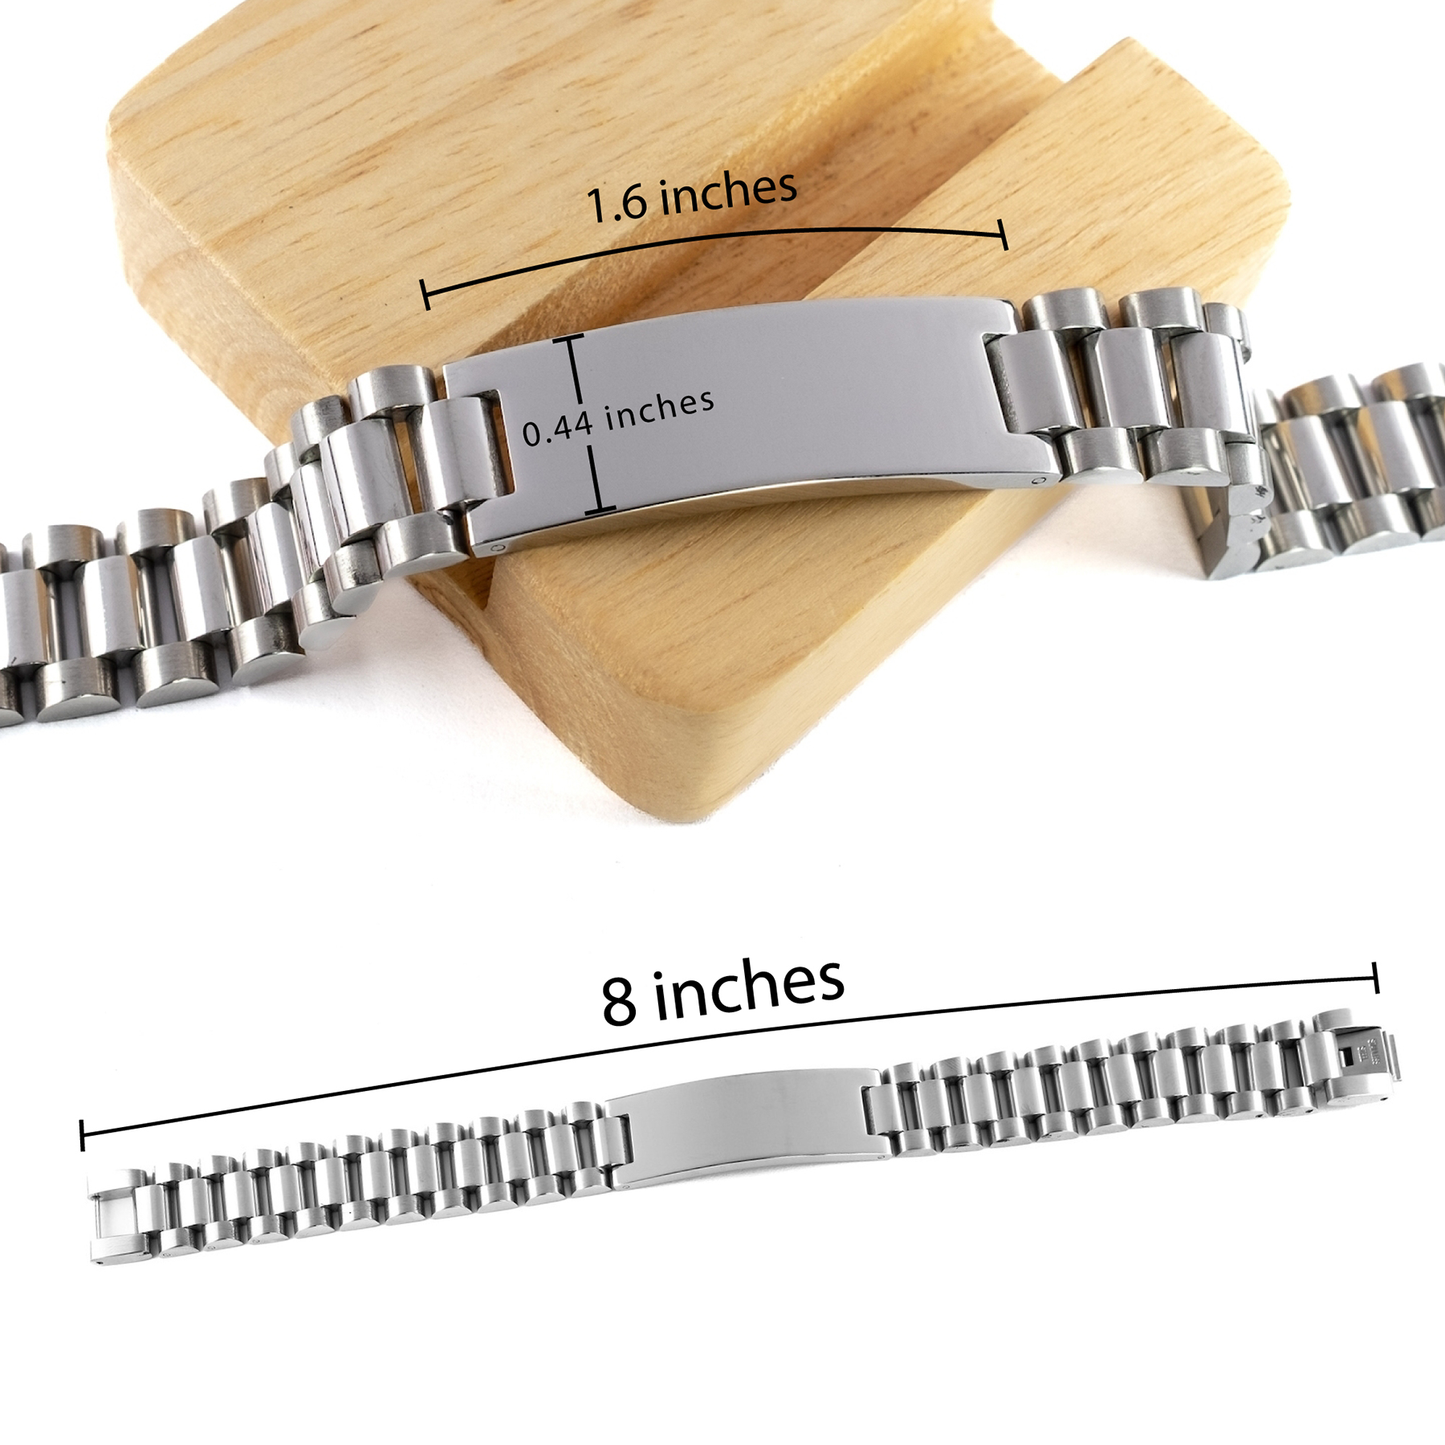 Stepson Motivational Gifts from Bonus Dad, Remember to never give up no matter what, Inspirational Birthday Ladder Stainless Steel Bracelet for Stepson